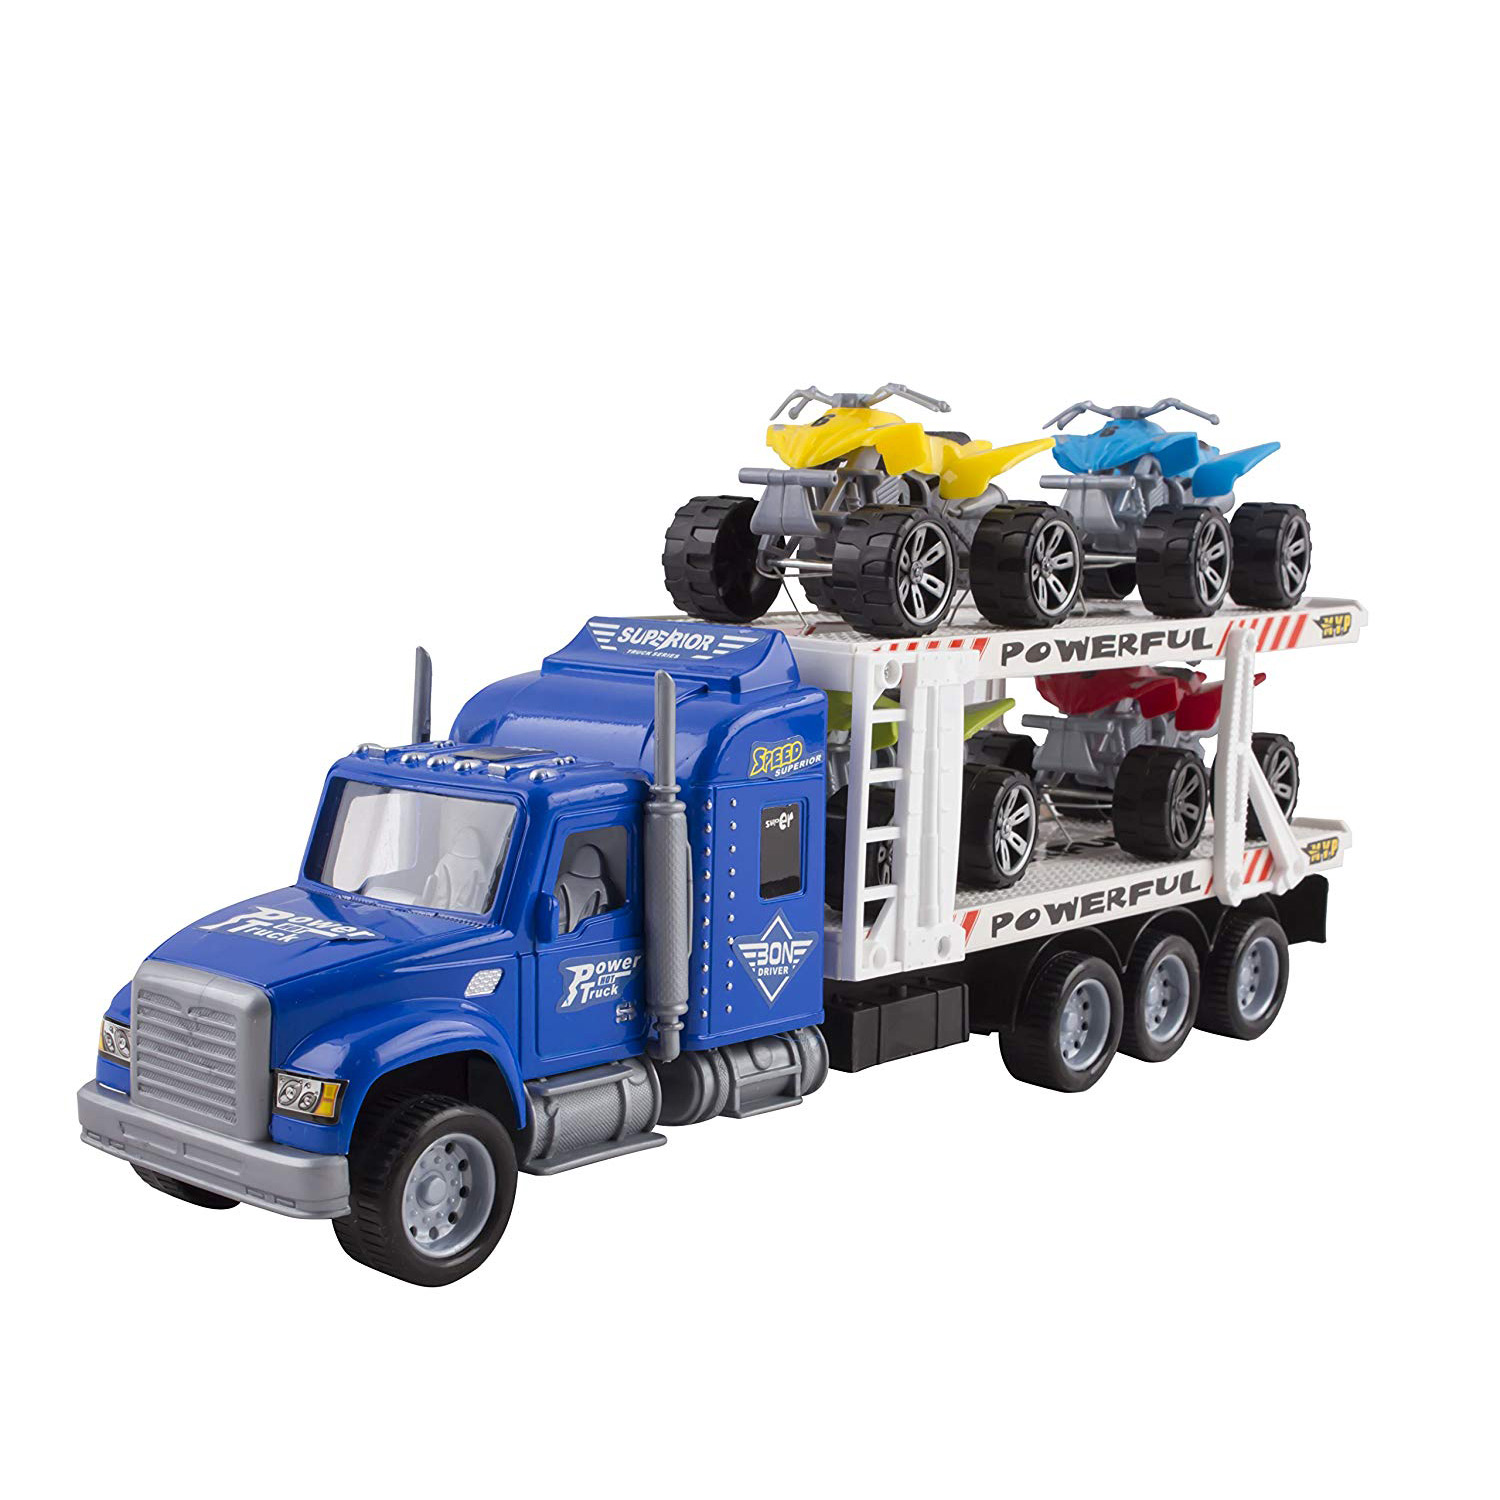 Toy Truck Transporter Trailer 145 Childrens Friction Big Rig With 4 ATV Toys No Batteries Or Assembly Required Perfect Semi Truck For Kids Blue Truck 666-28A